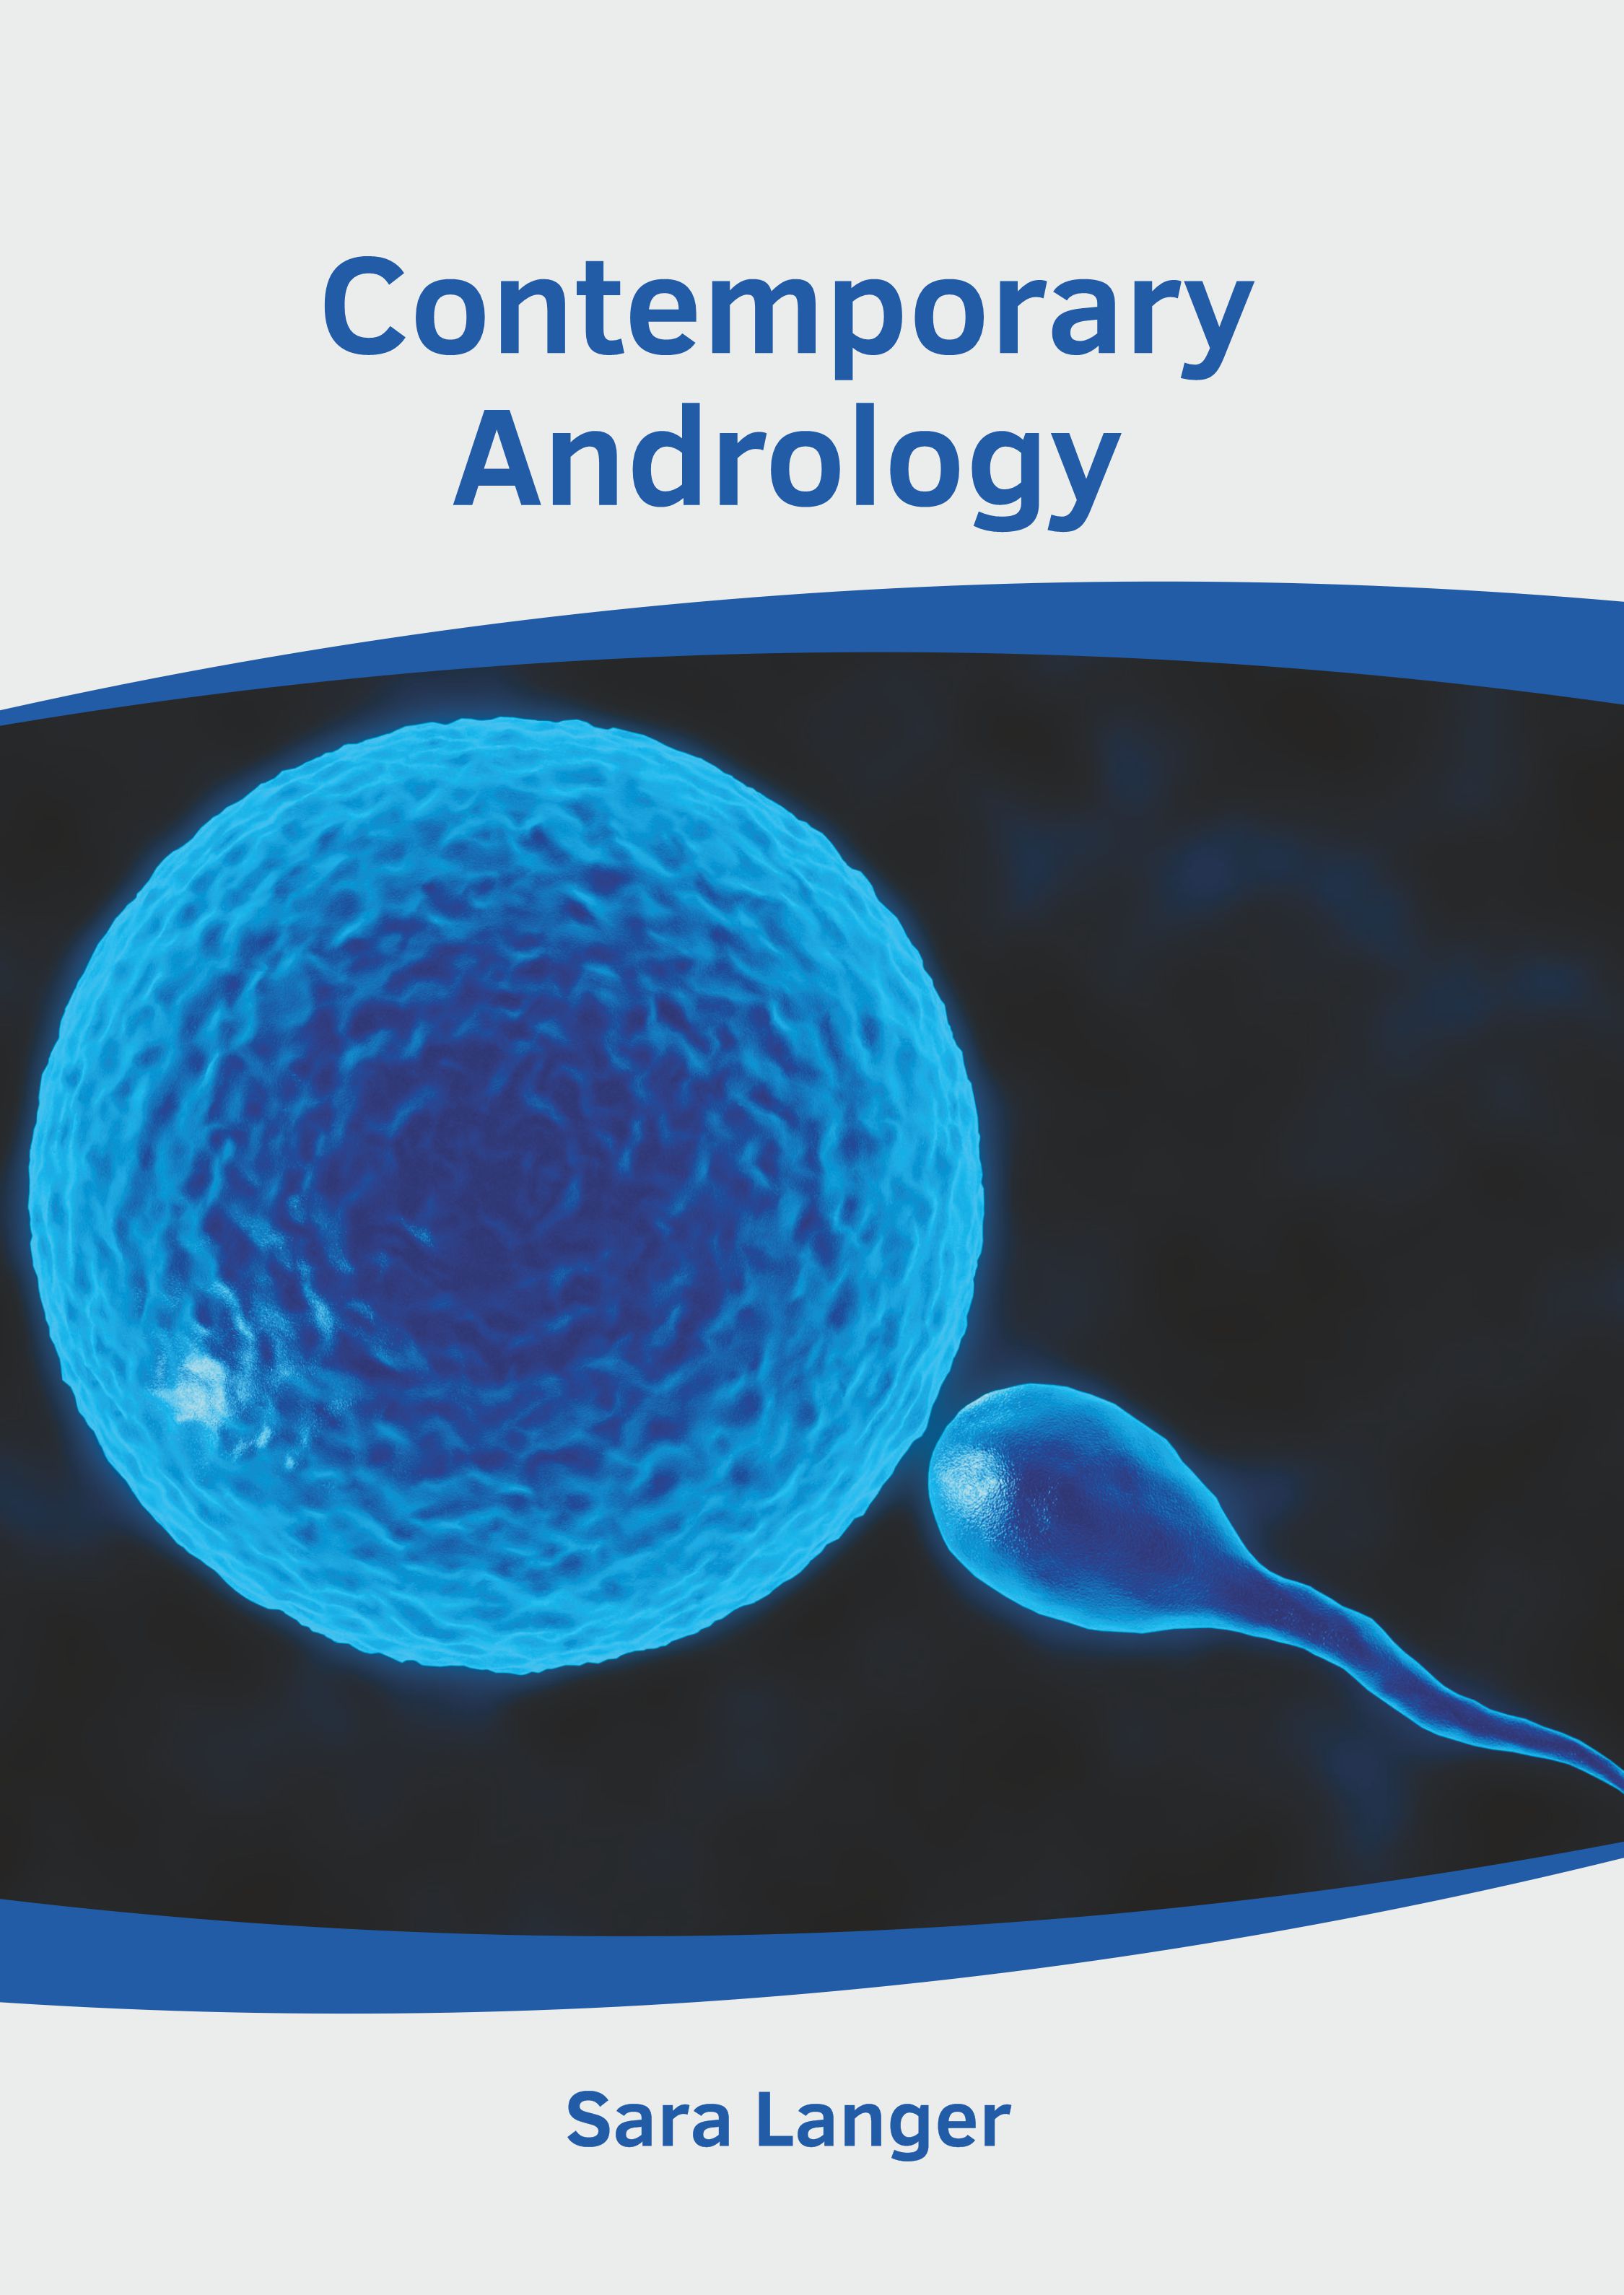 

exclusive-publishers/american-medical-publishers/contemporary-andrology-9781639275113